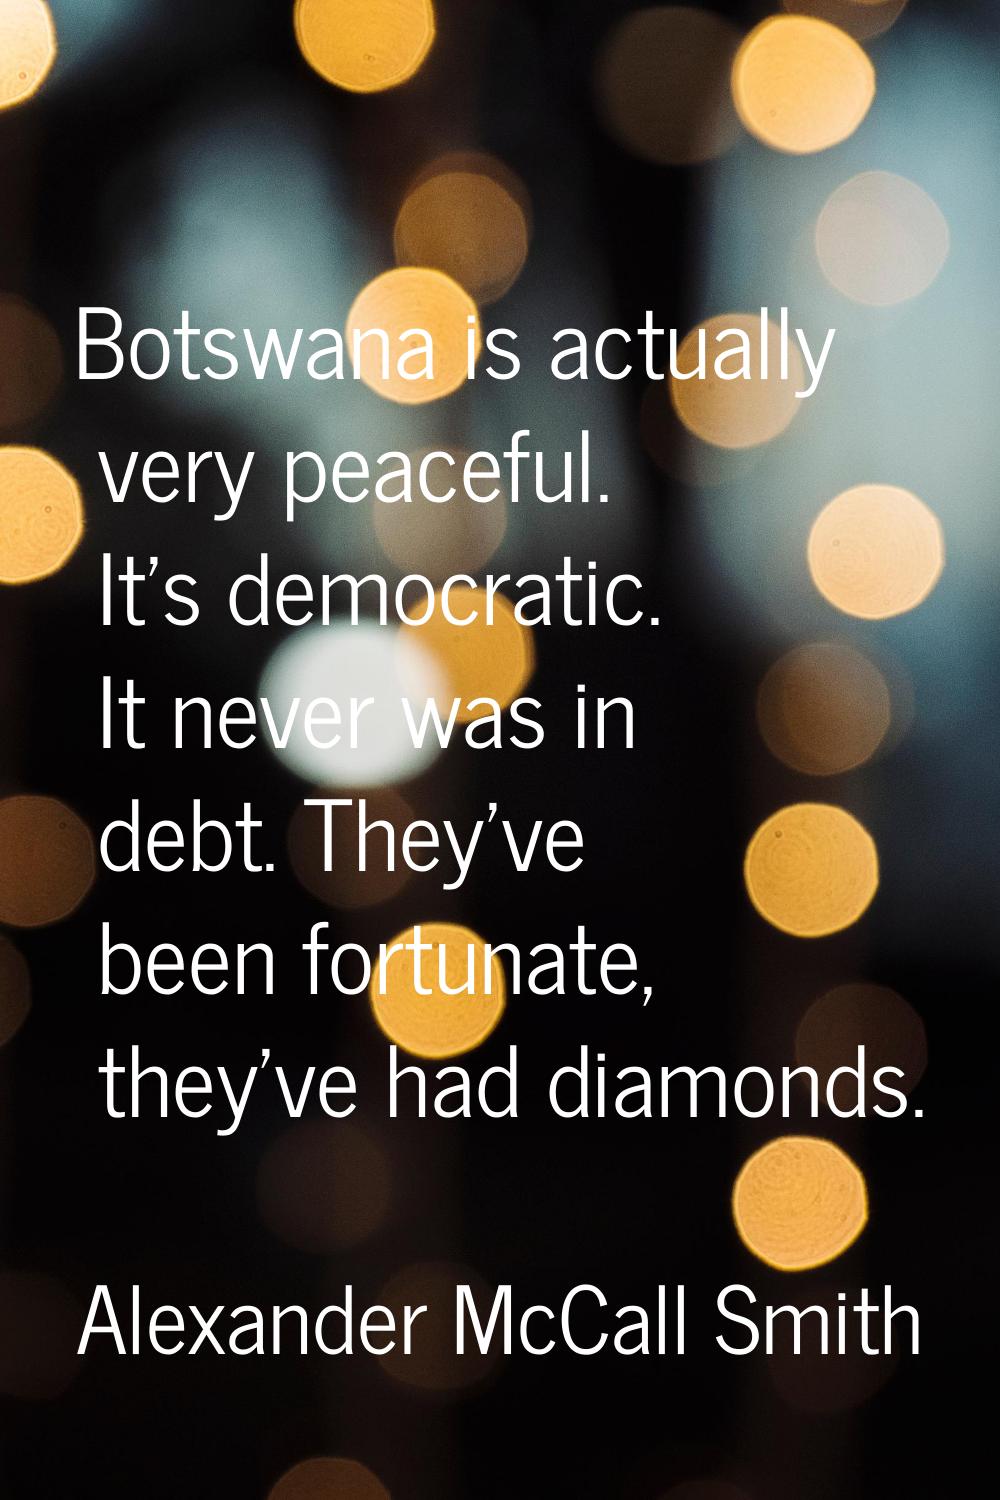 Botswana is actually very peaceful. It's democratic. It never was in debt. They've been fortunate, 